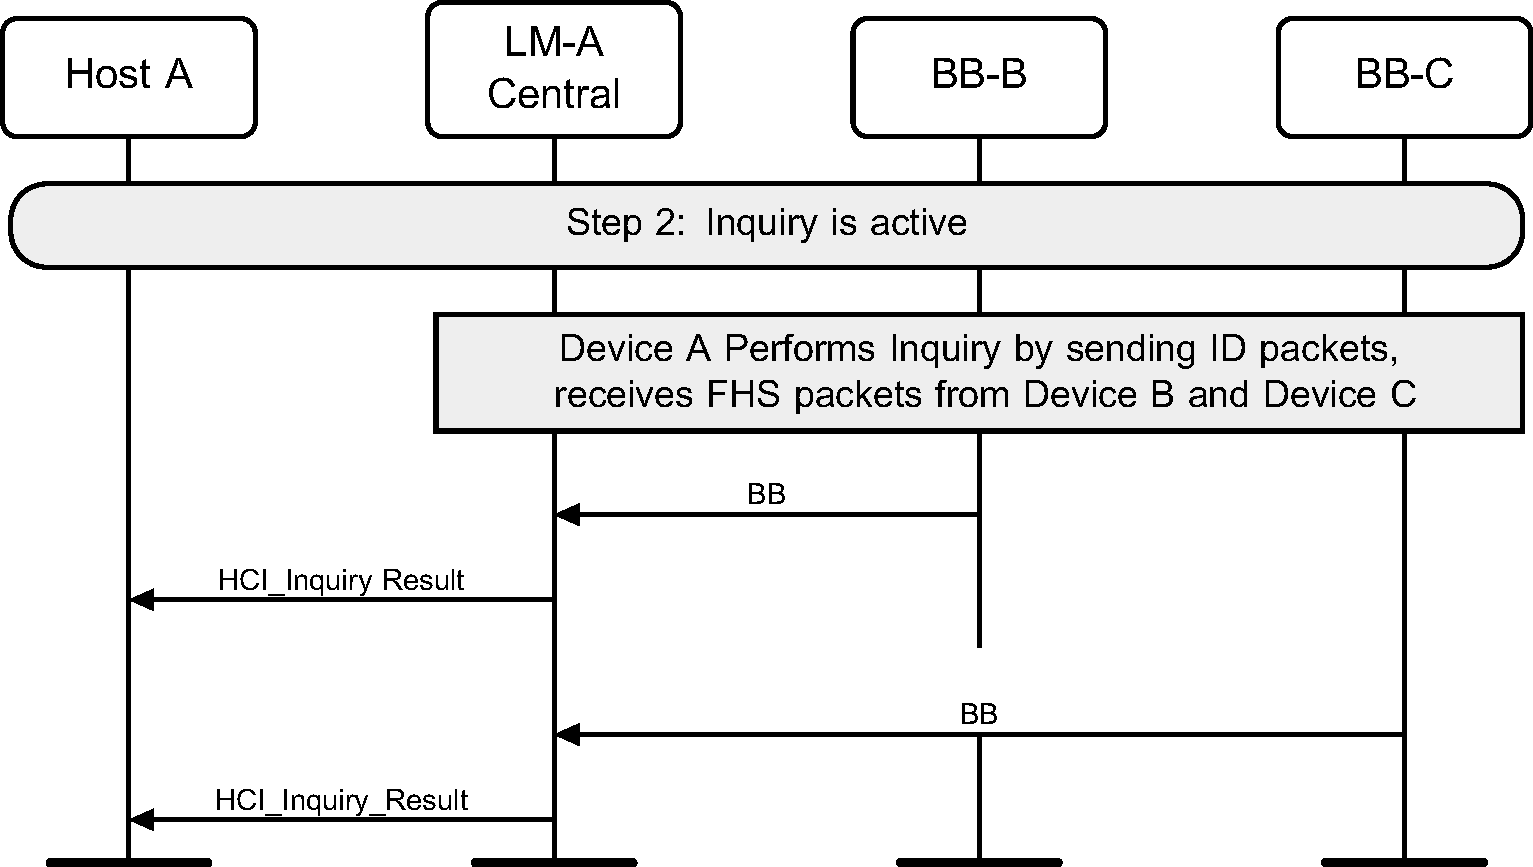 LM-A performs inquiry and reports result